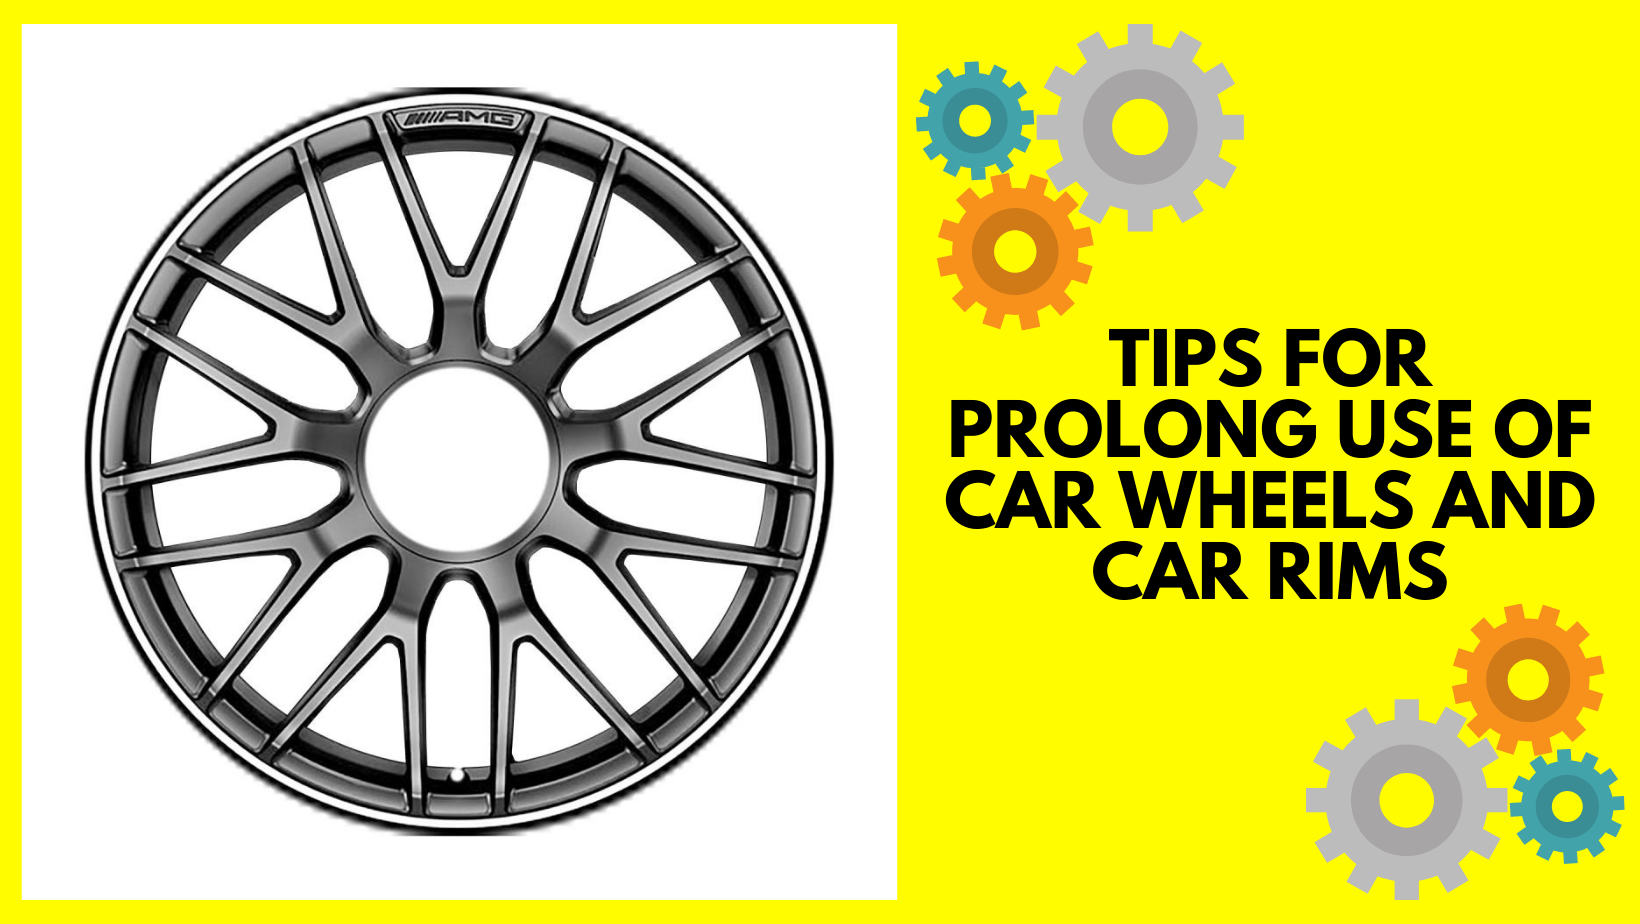 Tips for Prolong use of Car Wheels and Car Rims